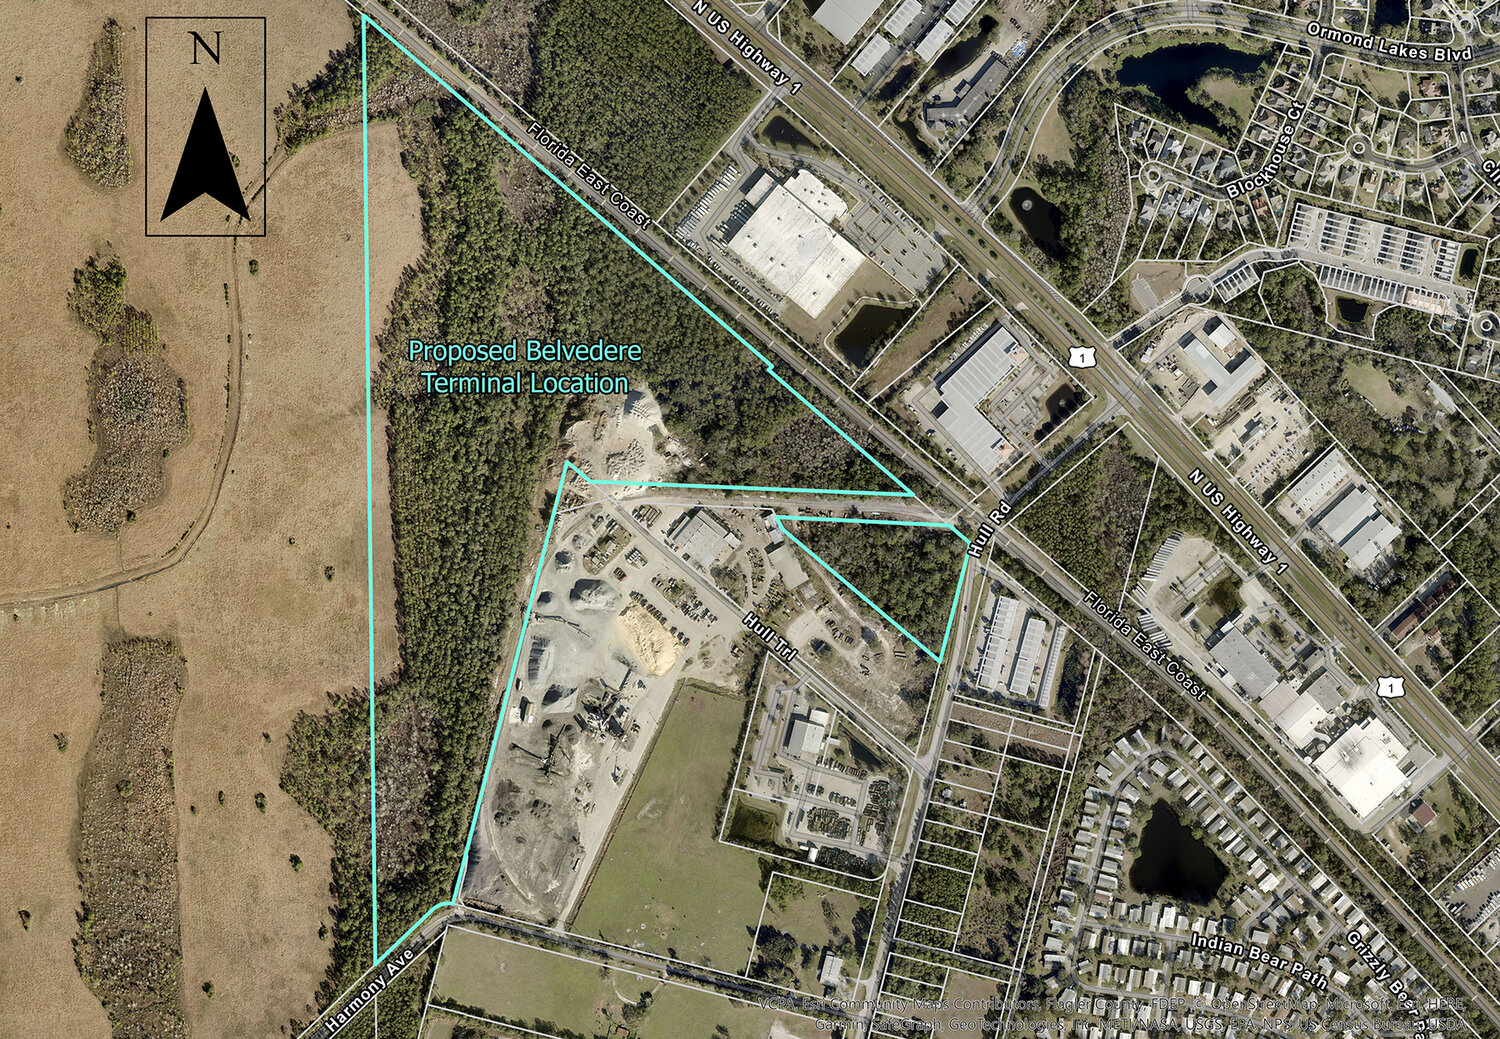 The location of the proposed terminal.